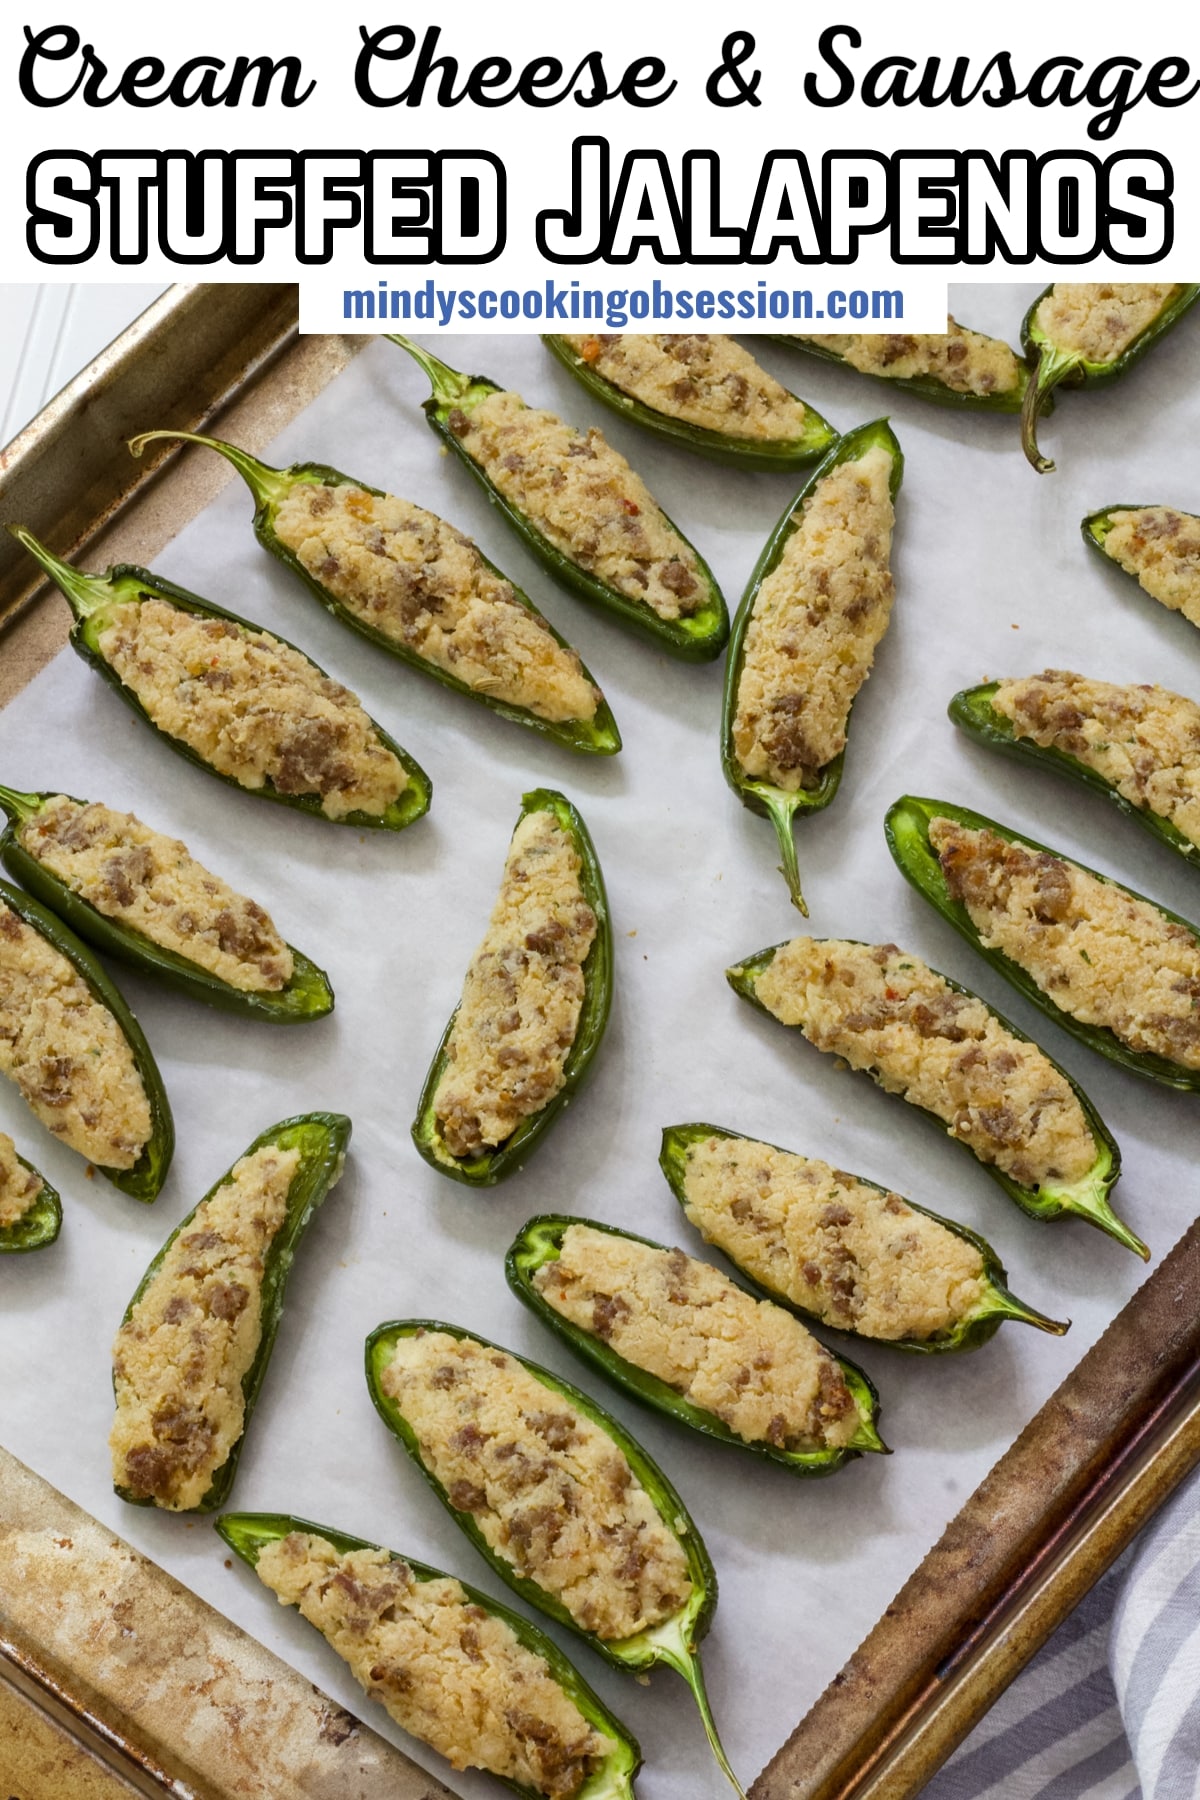 Spice up your game day spread with these irresistible stuffed jalapeno peppers! Filled with cream cheese, savory sausage, and a hint of garlic, these peppers are bursting with flavor. With only 6 ingredients, they're a breeze to whip up, leaving you more time to enjoy the festivities. via @mindyscookingobsession